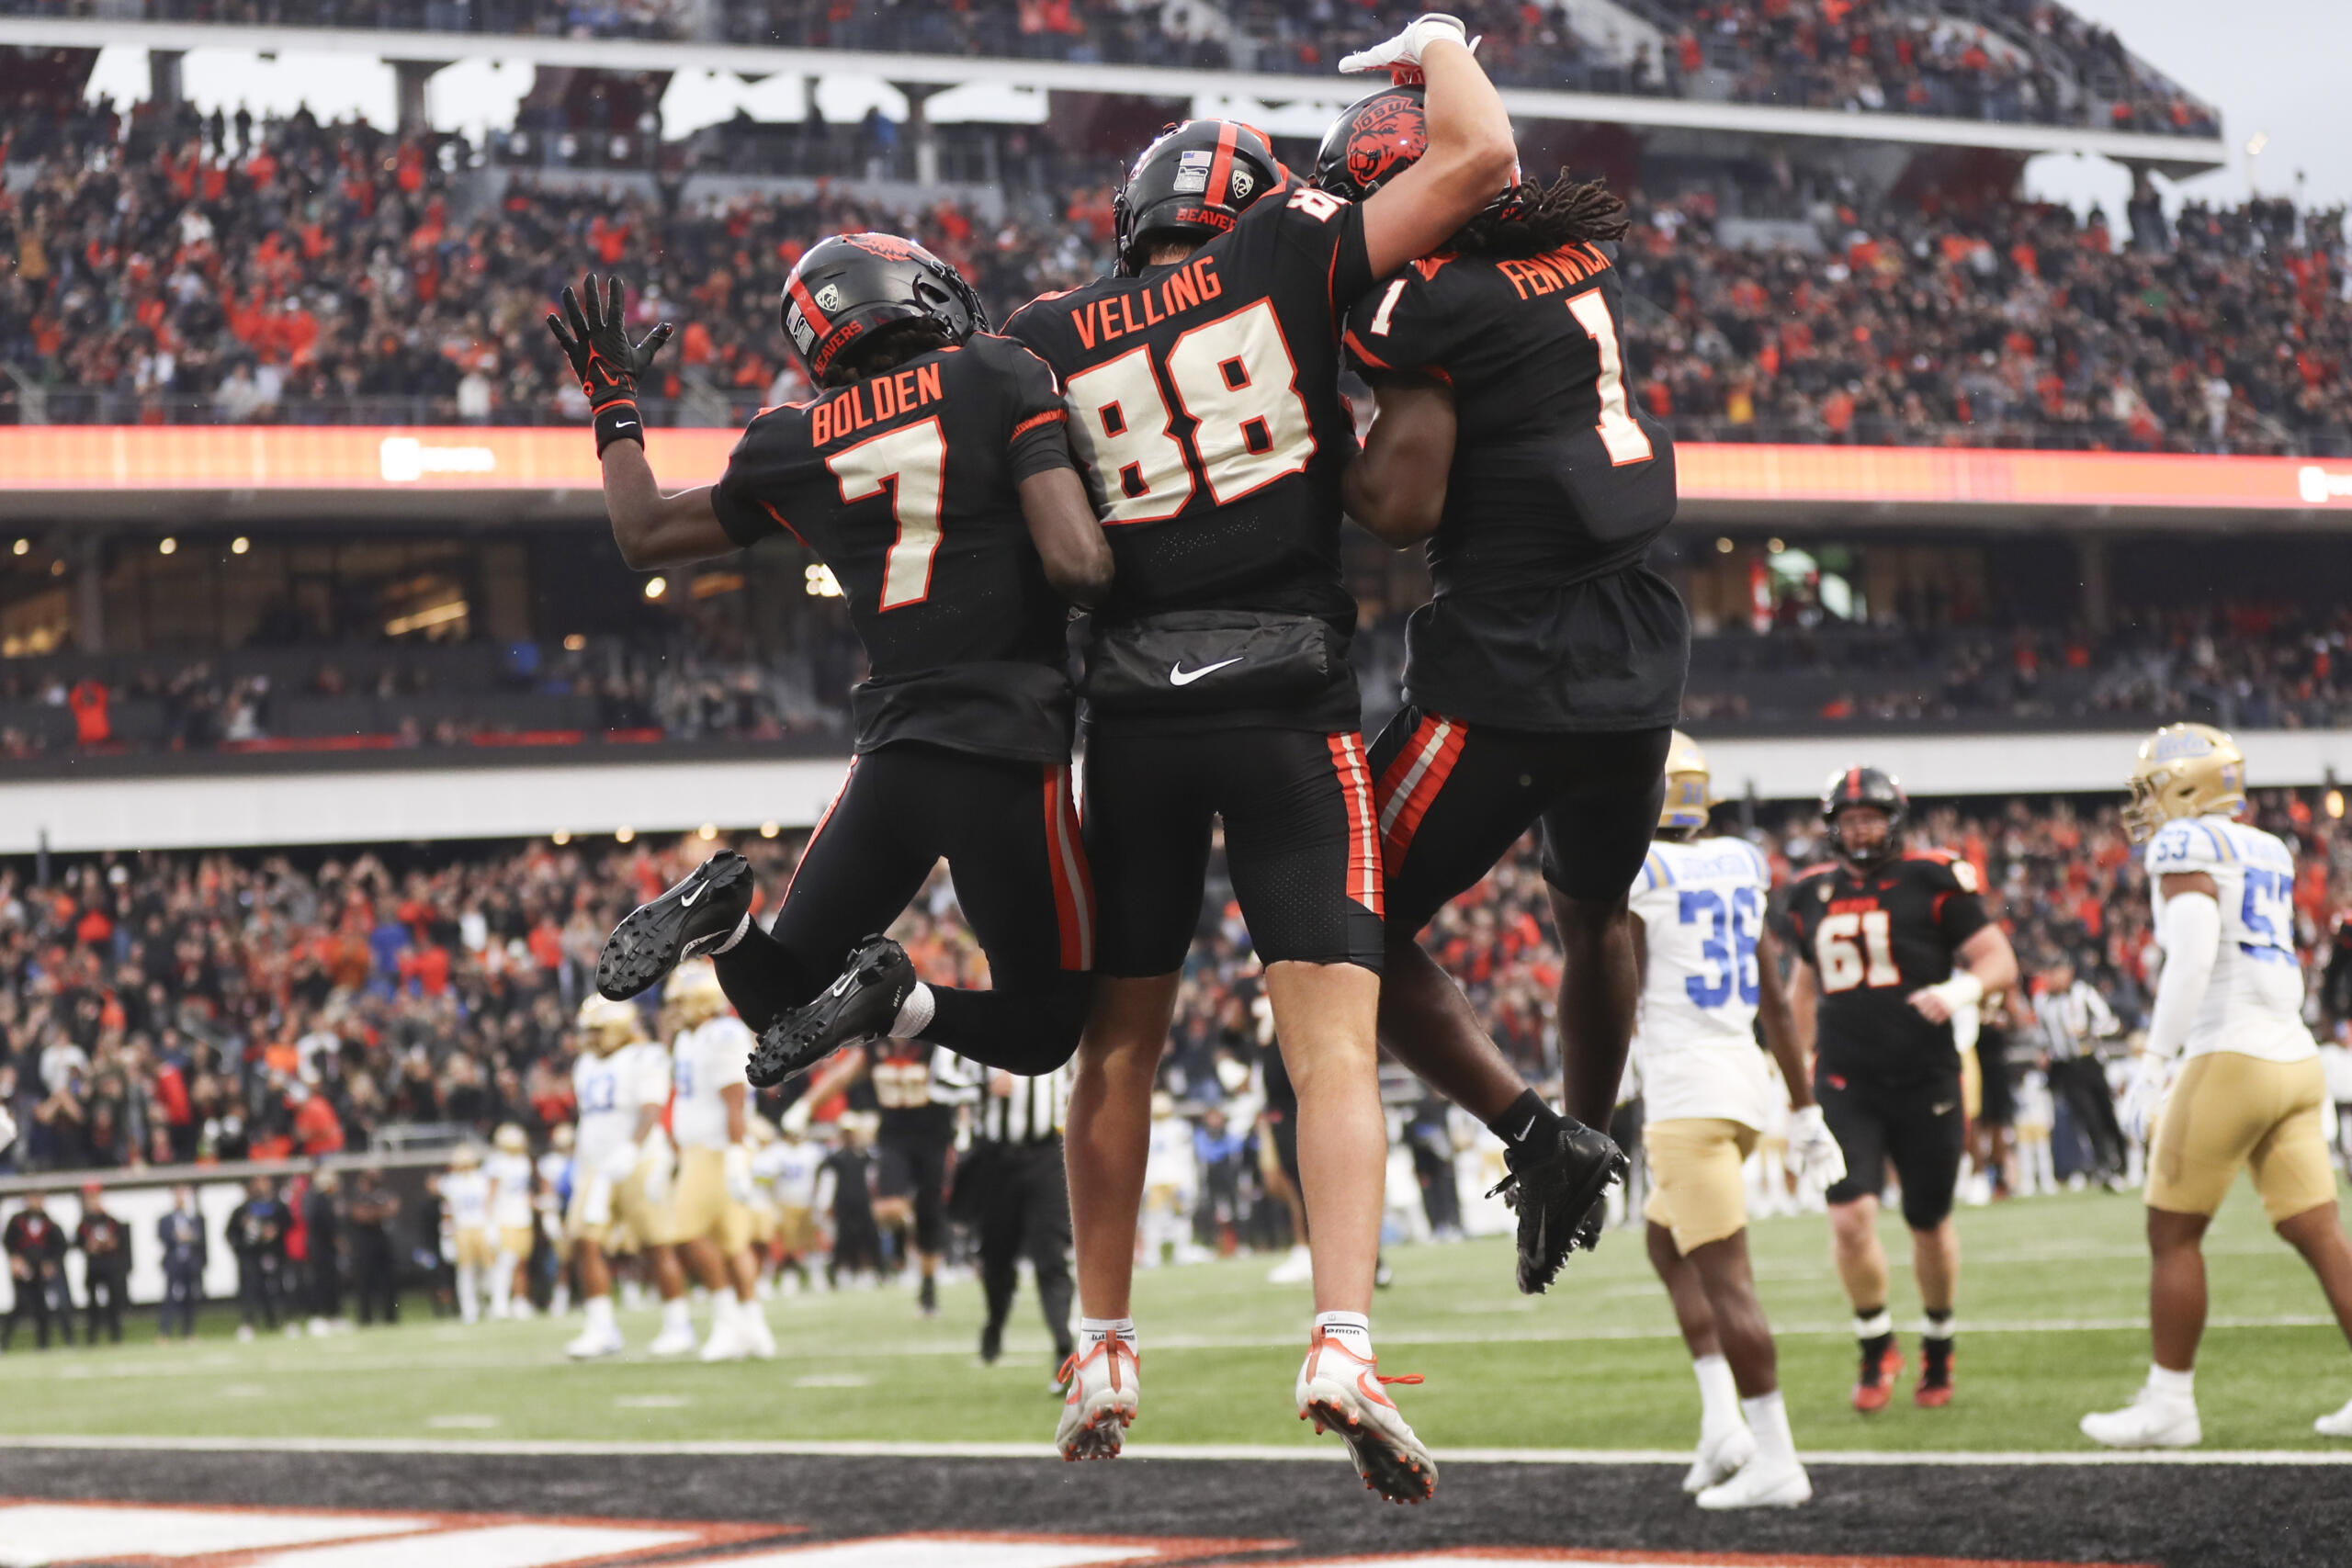 Oregon State tight end Jack Velling, center, celebrates after scoring a touchdown against UCLA with Silas Bolden, left, and Deshaun Fenwick, right, during the first half of an NCAA college football game Saturday, Oct. 14, 2023, in Corvallis, Ore.